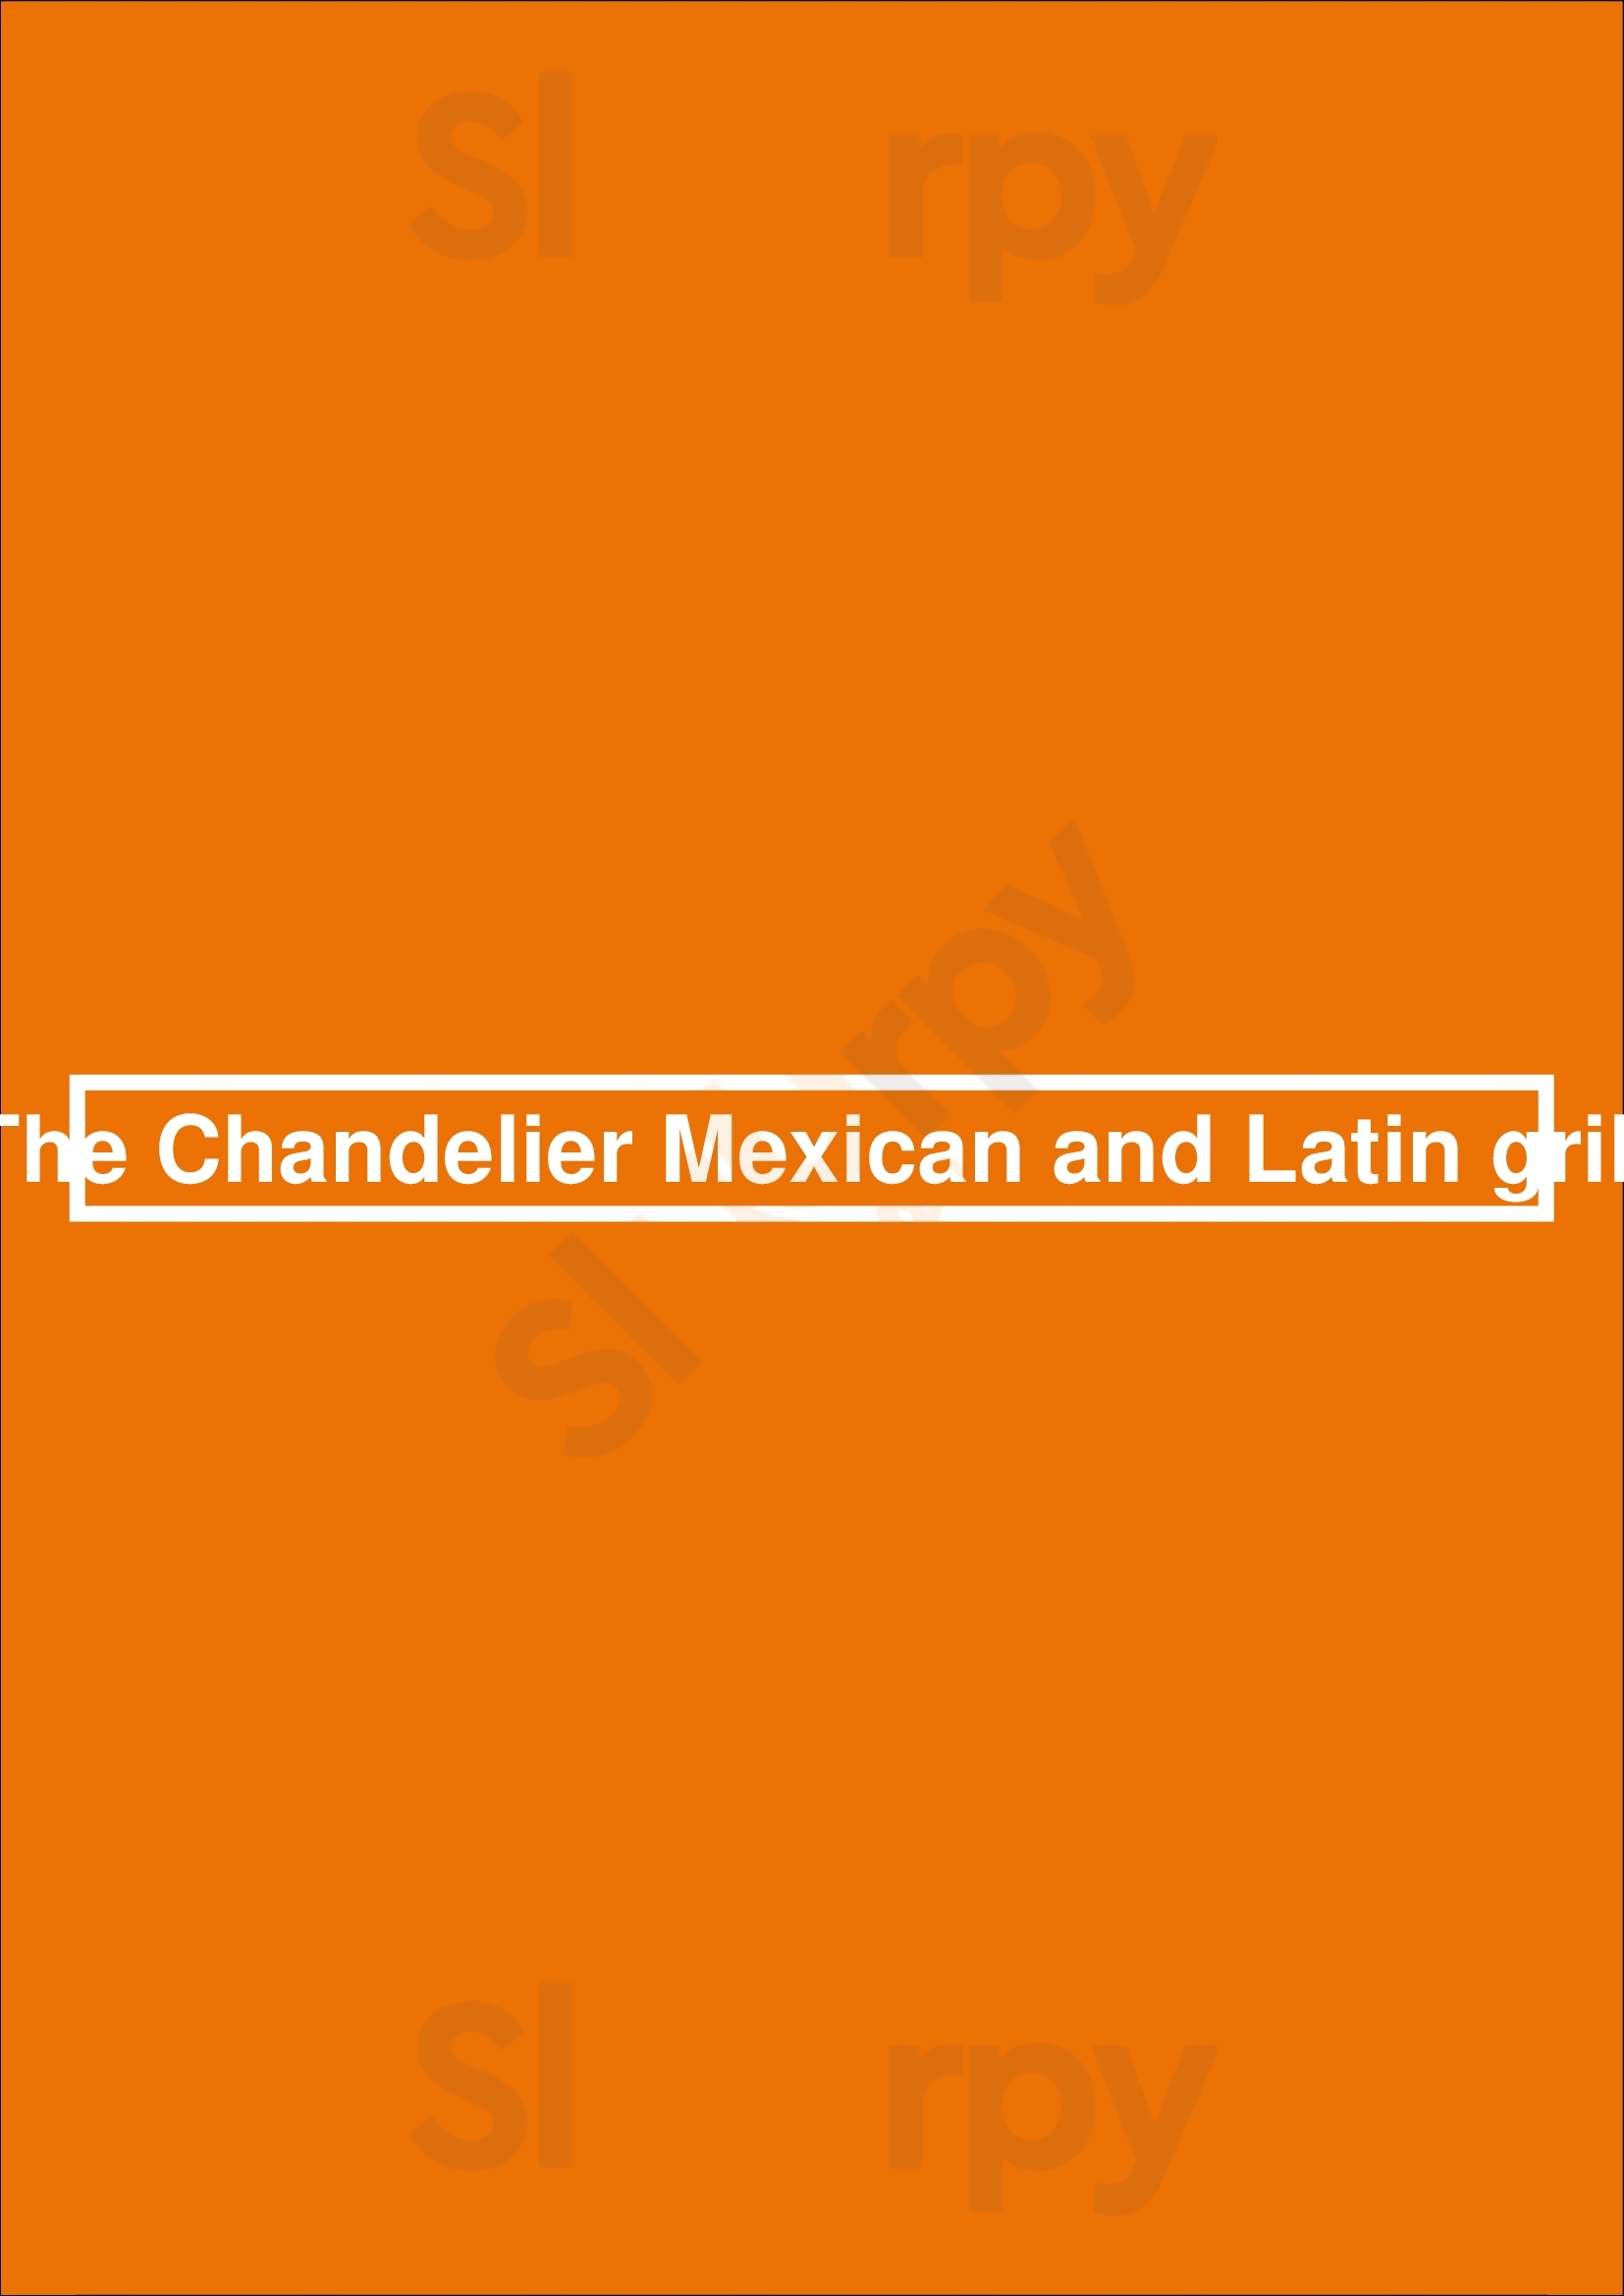 The Chandelier Mexican And Latin Grill Doncaster Menu - 1